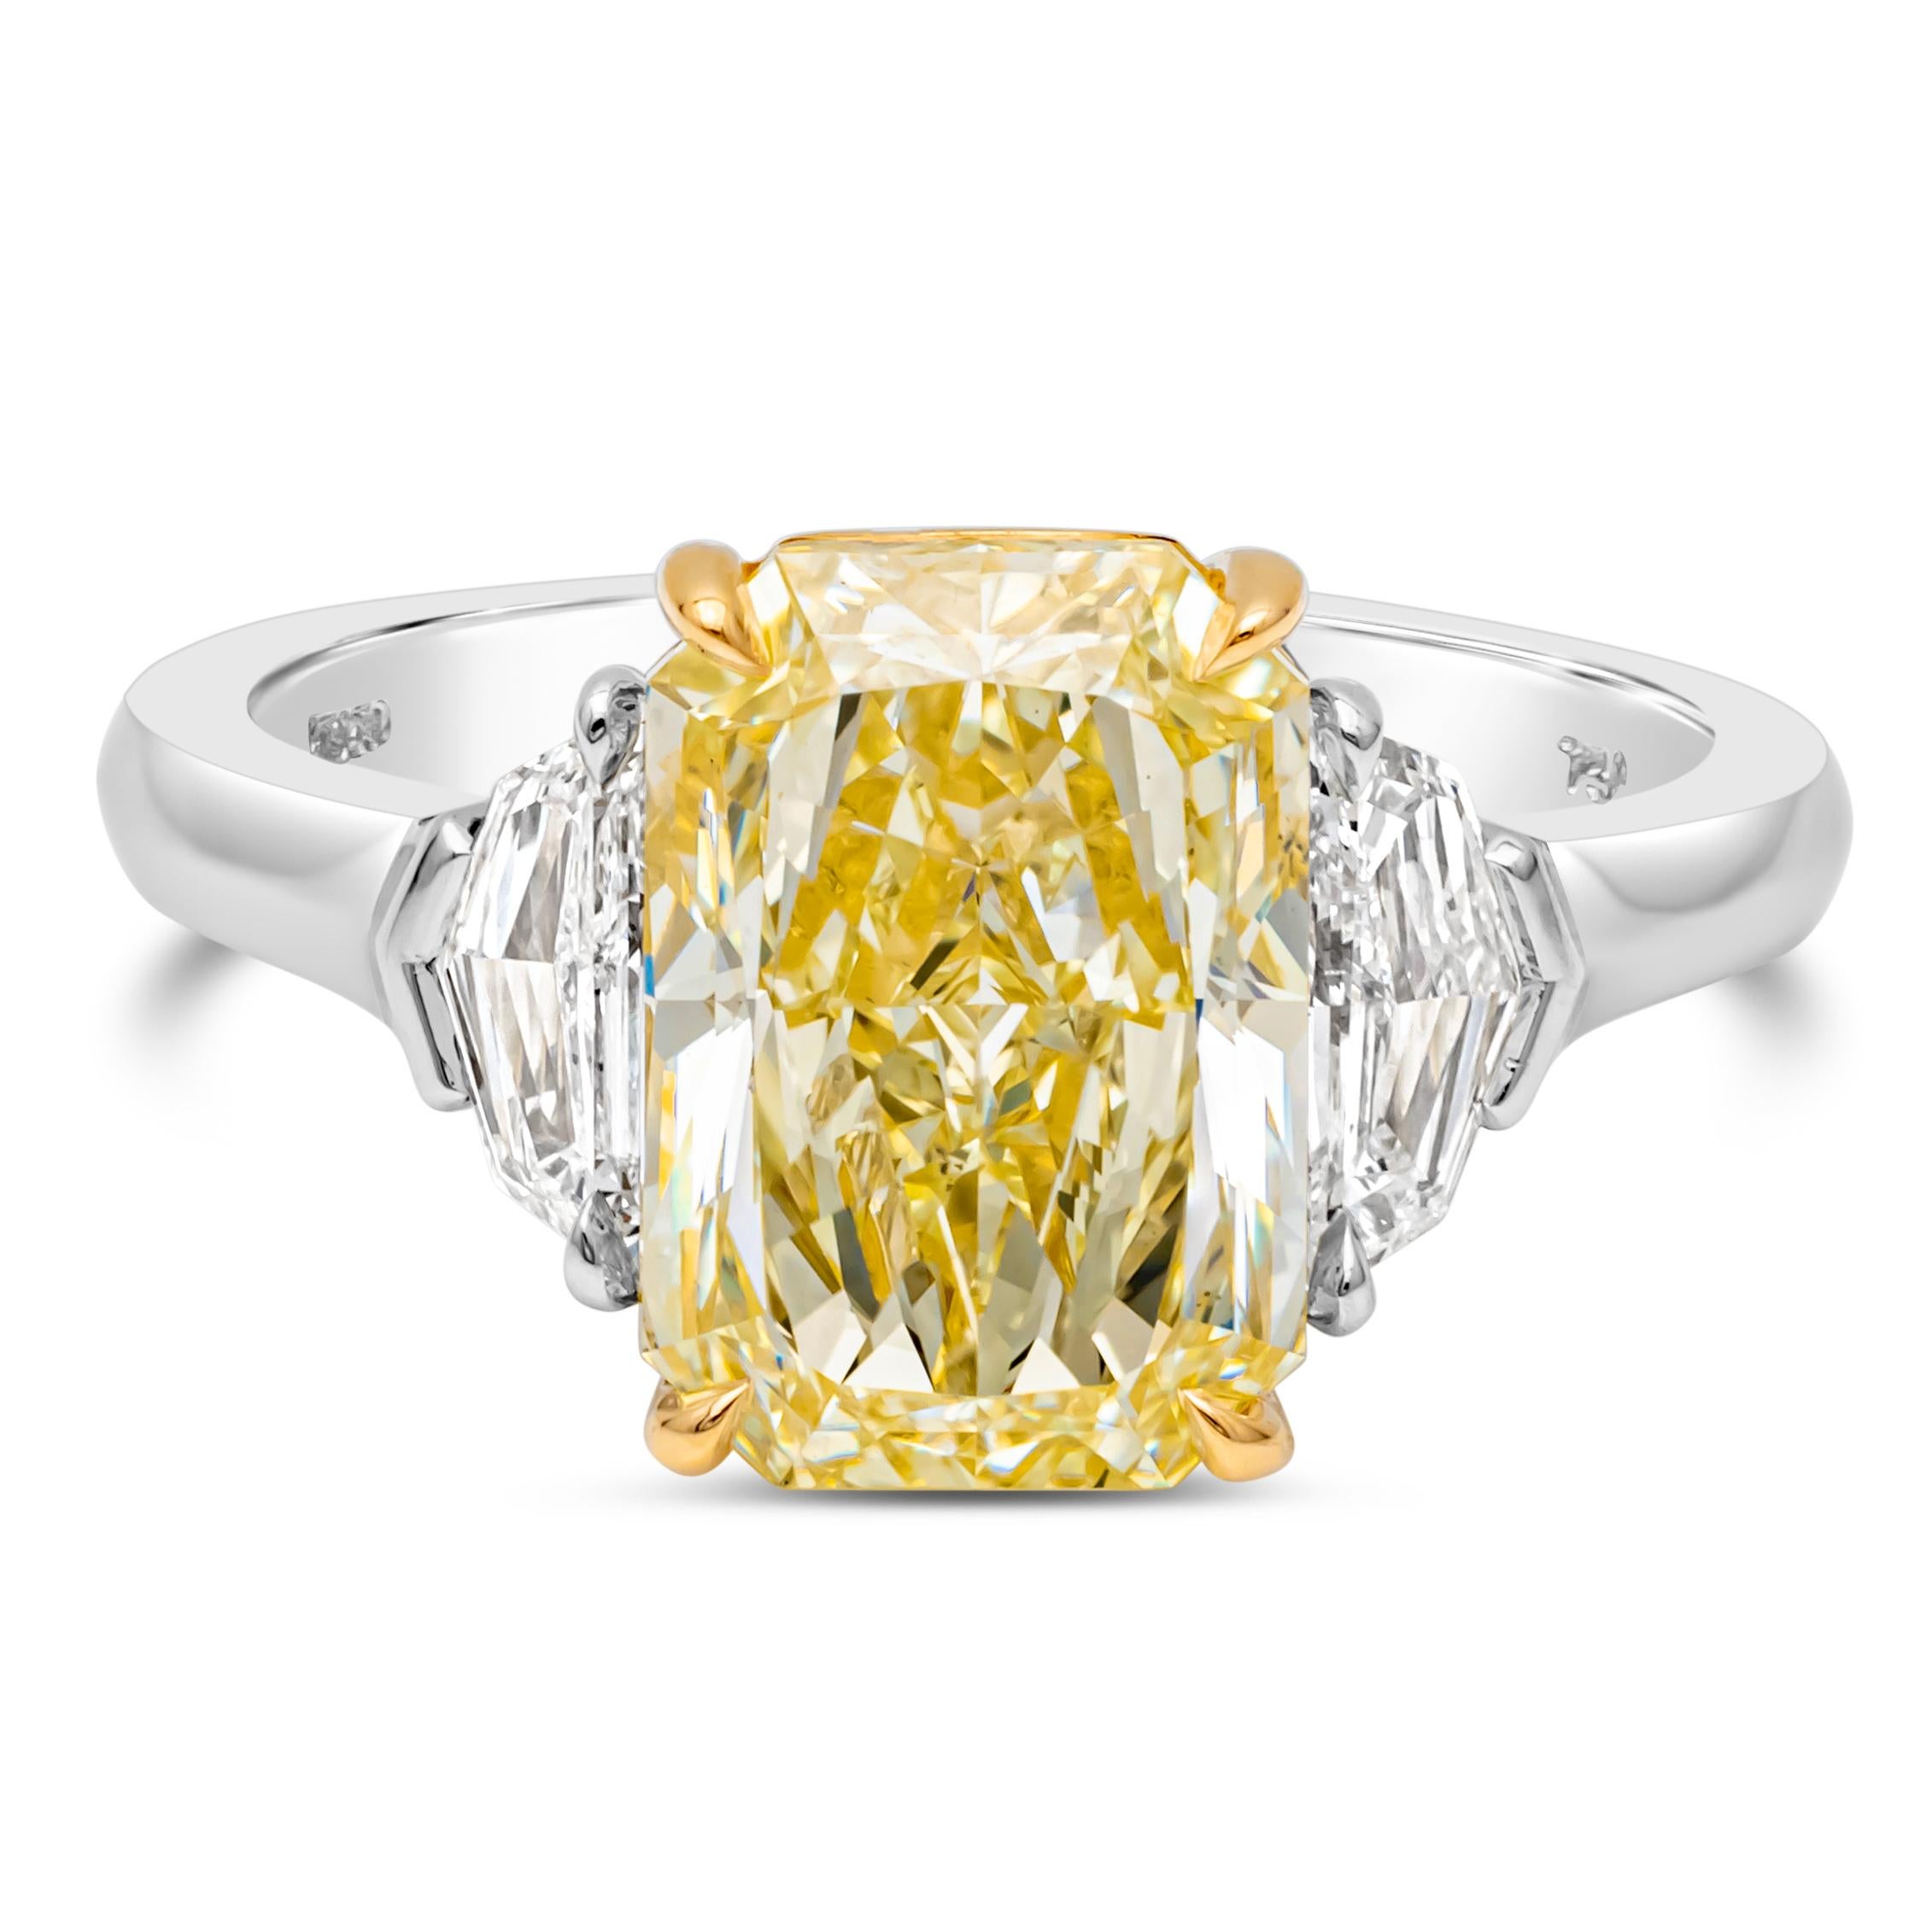 This gorgeous three stone engagement ring features a 4.02 carats radiant cut fancy yellow diamond certified by GIA  as Y-Z color, SI1 in clarity and set in a classic four prong basket setting. Flanked by diamonds on each side weighing 0.51 carats